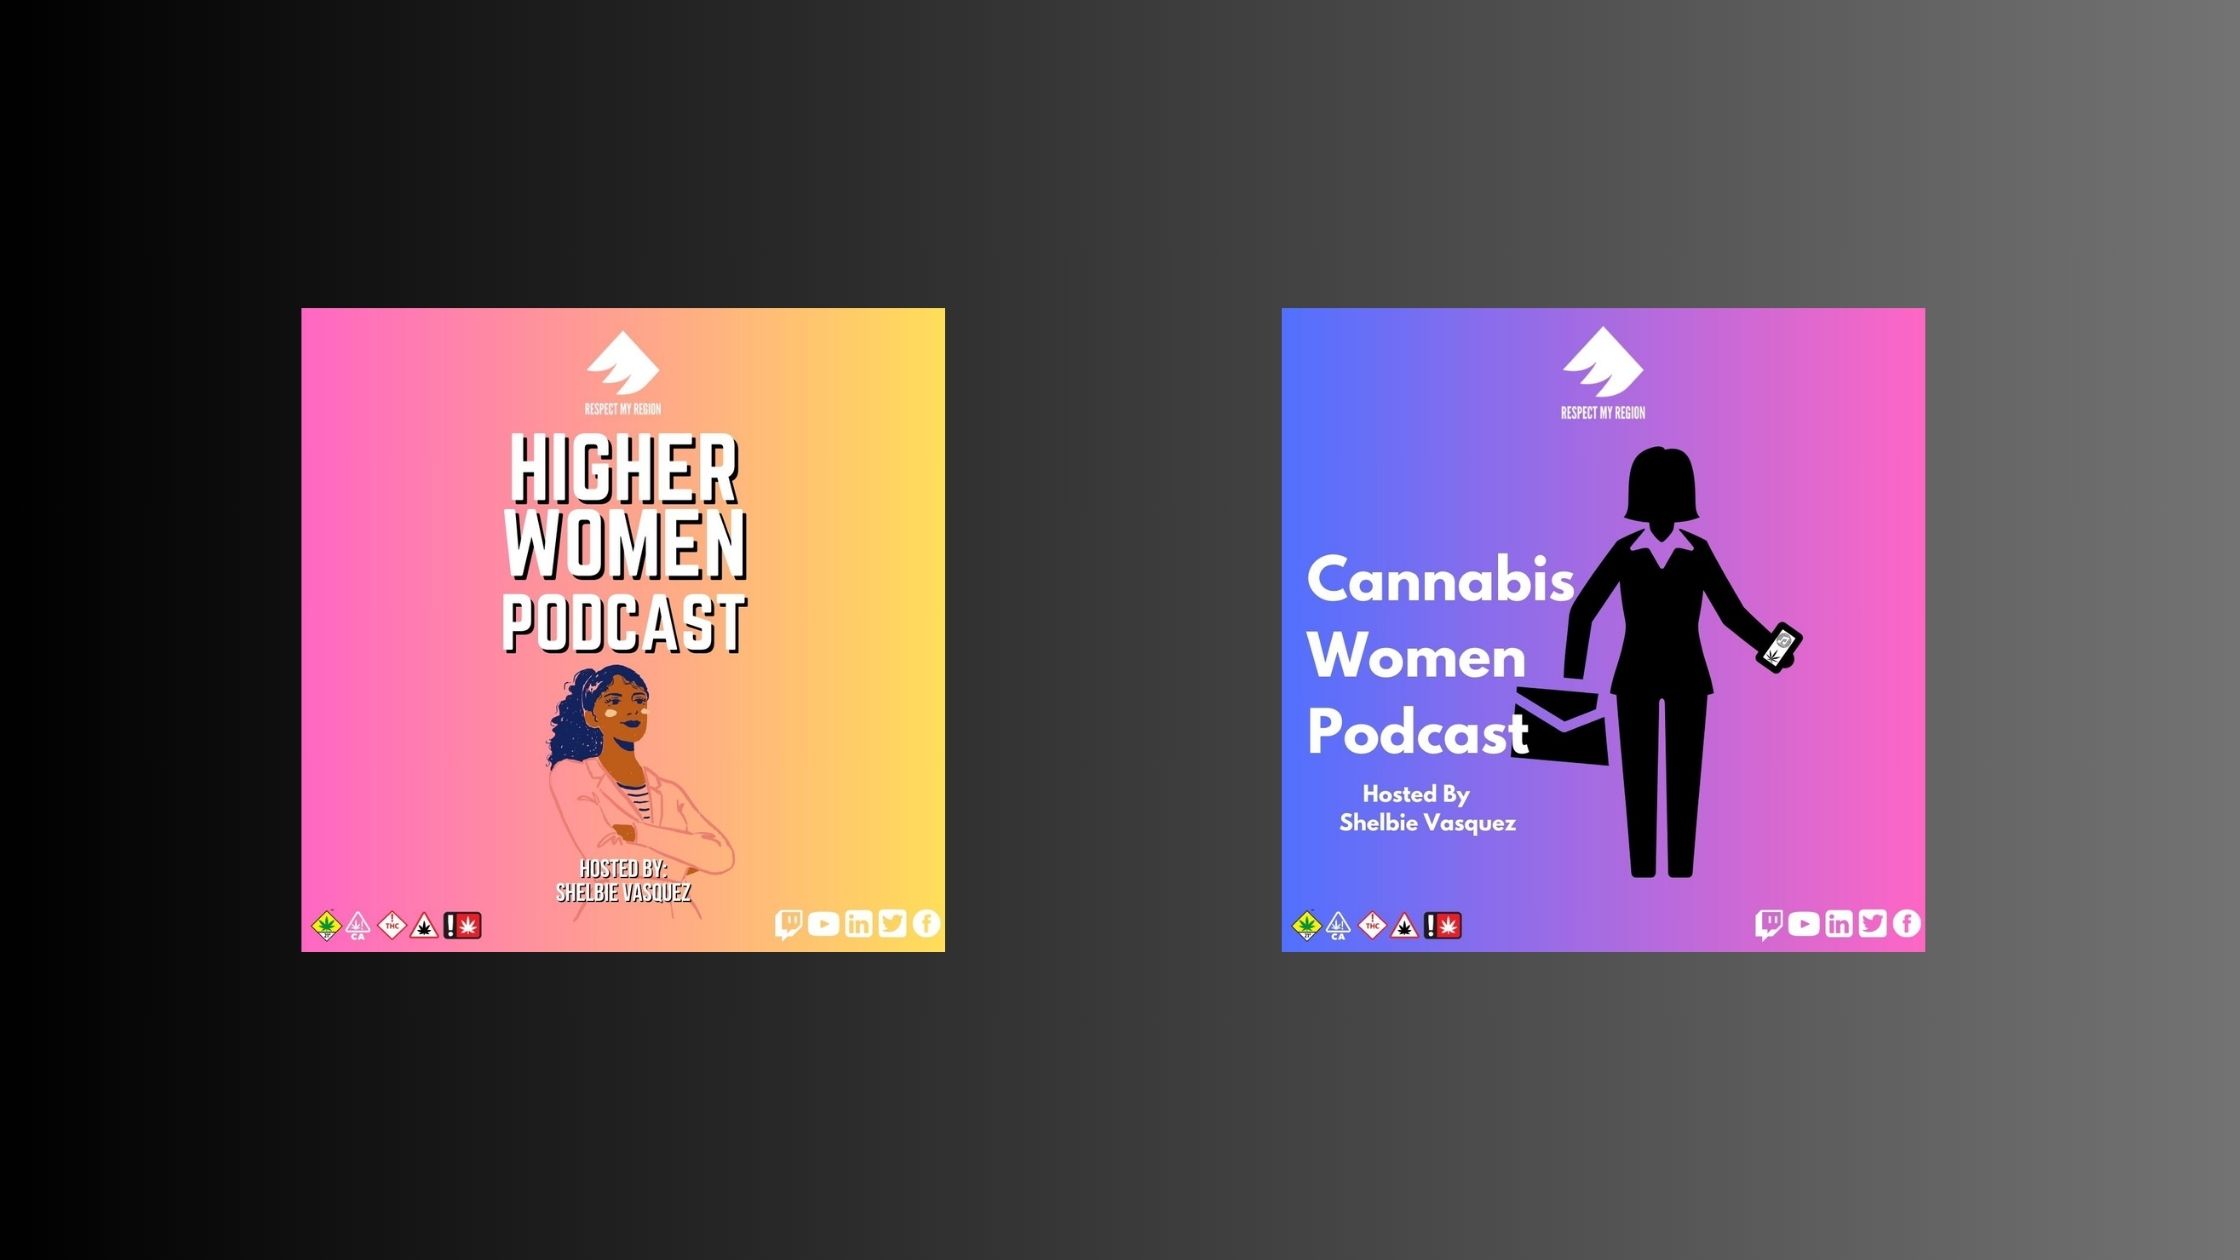 Respect My Region Announces New Cannabis Women Podcast + Season 3 Of The Higher Women Podcast